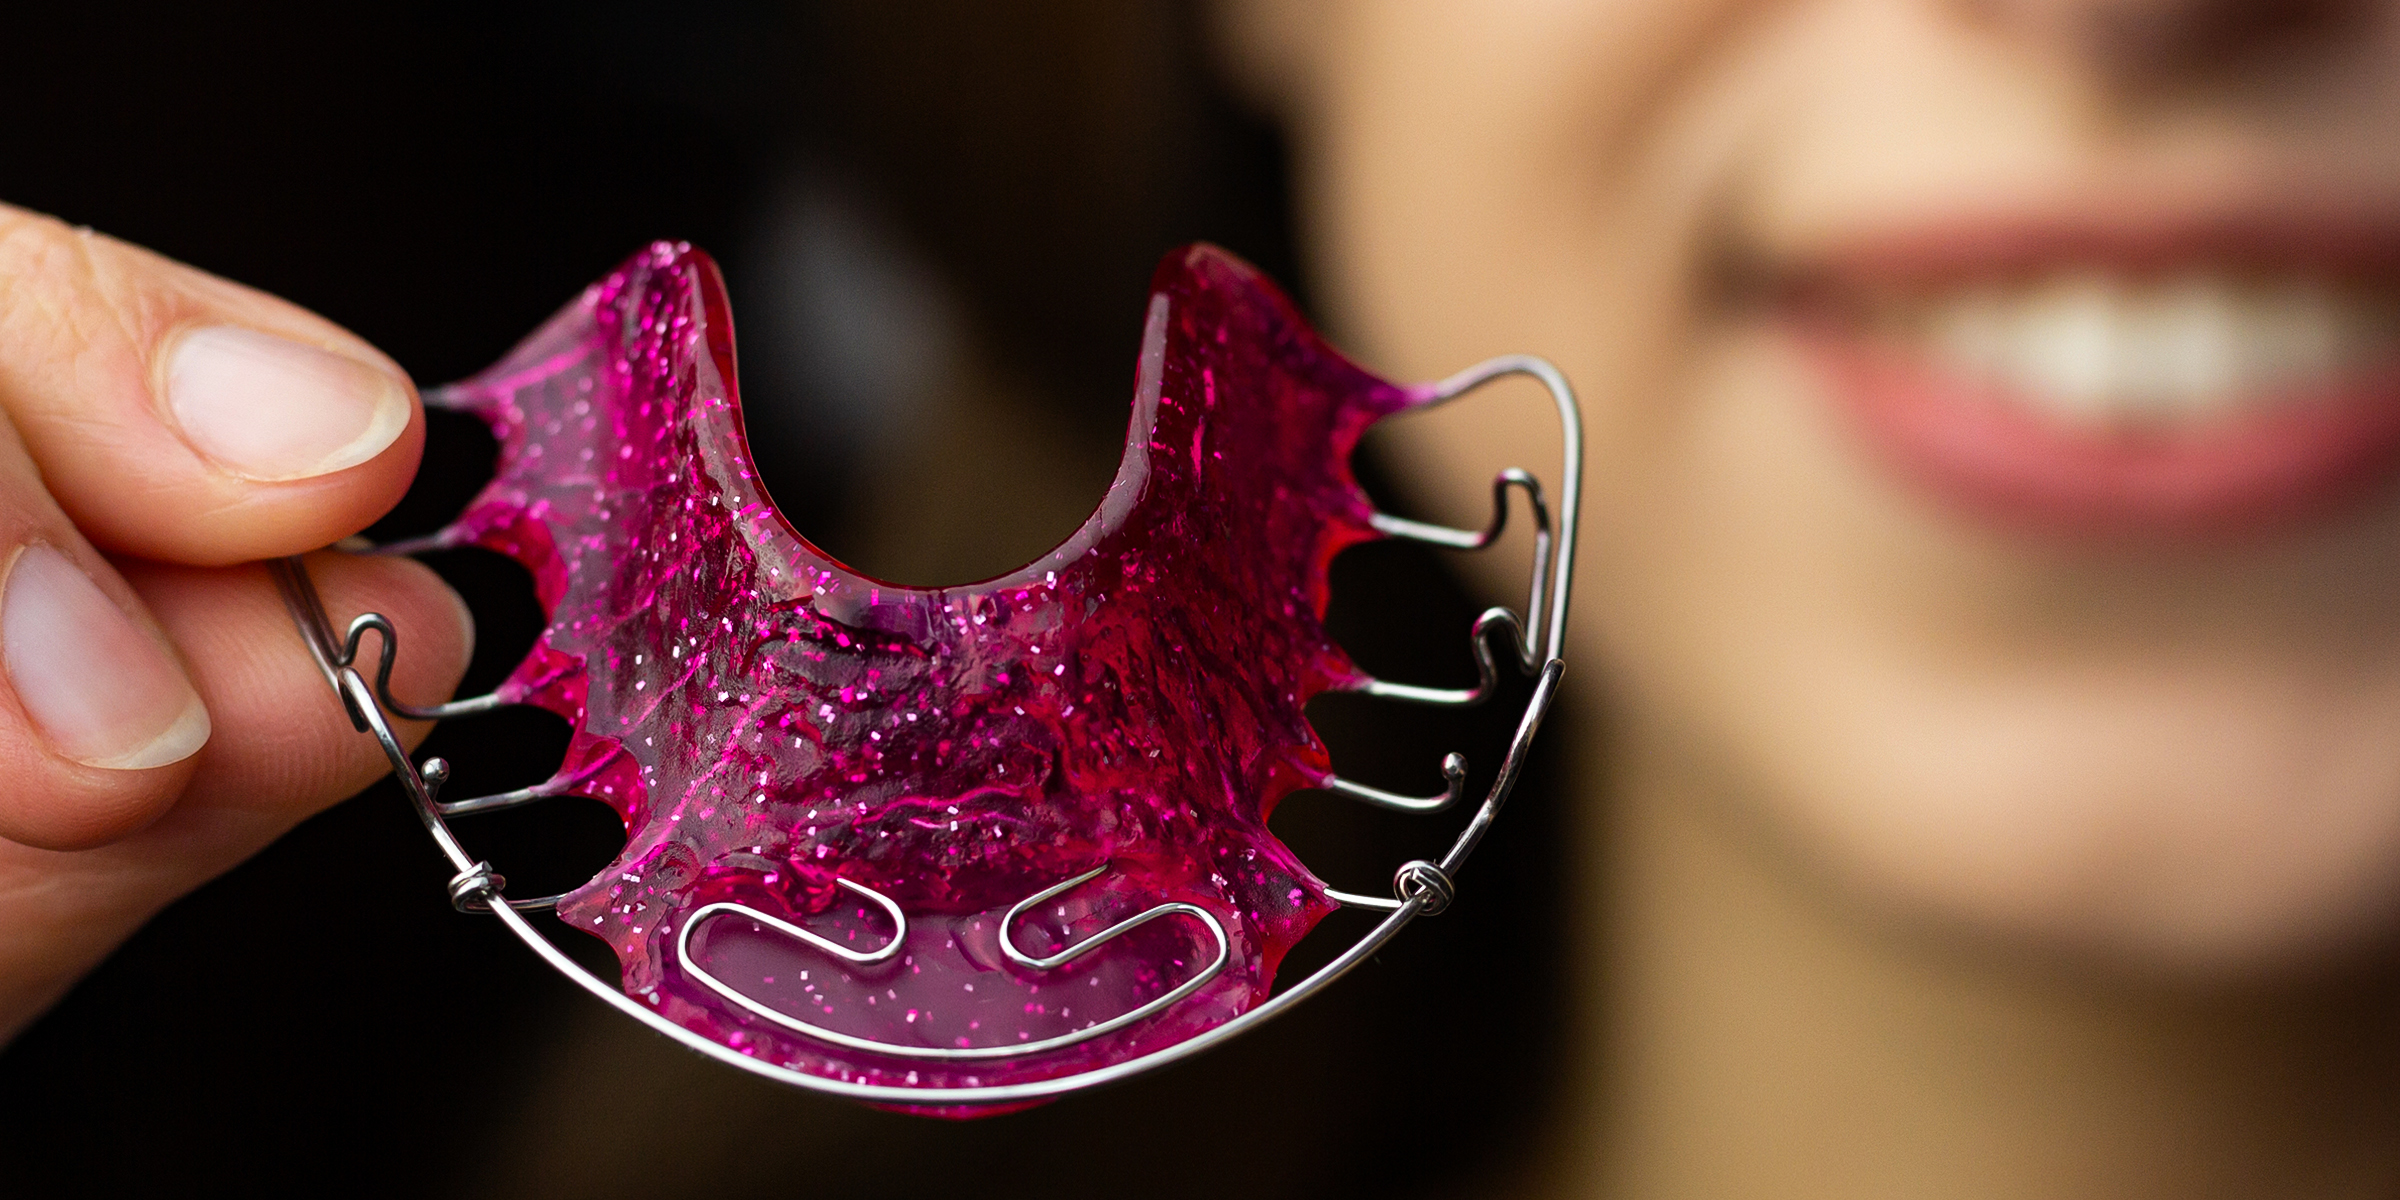 An up-close view of a retainer | Source: Shutterstock